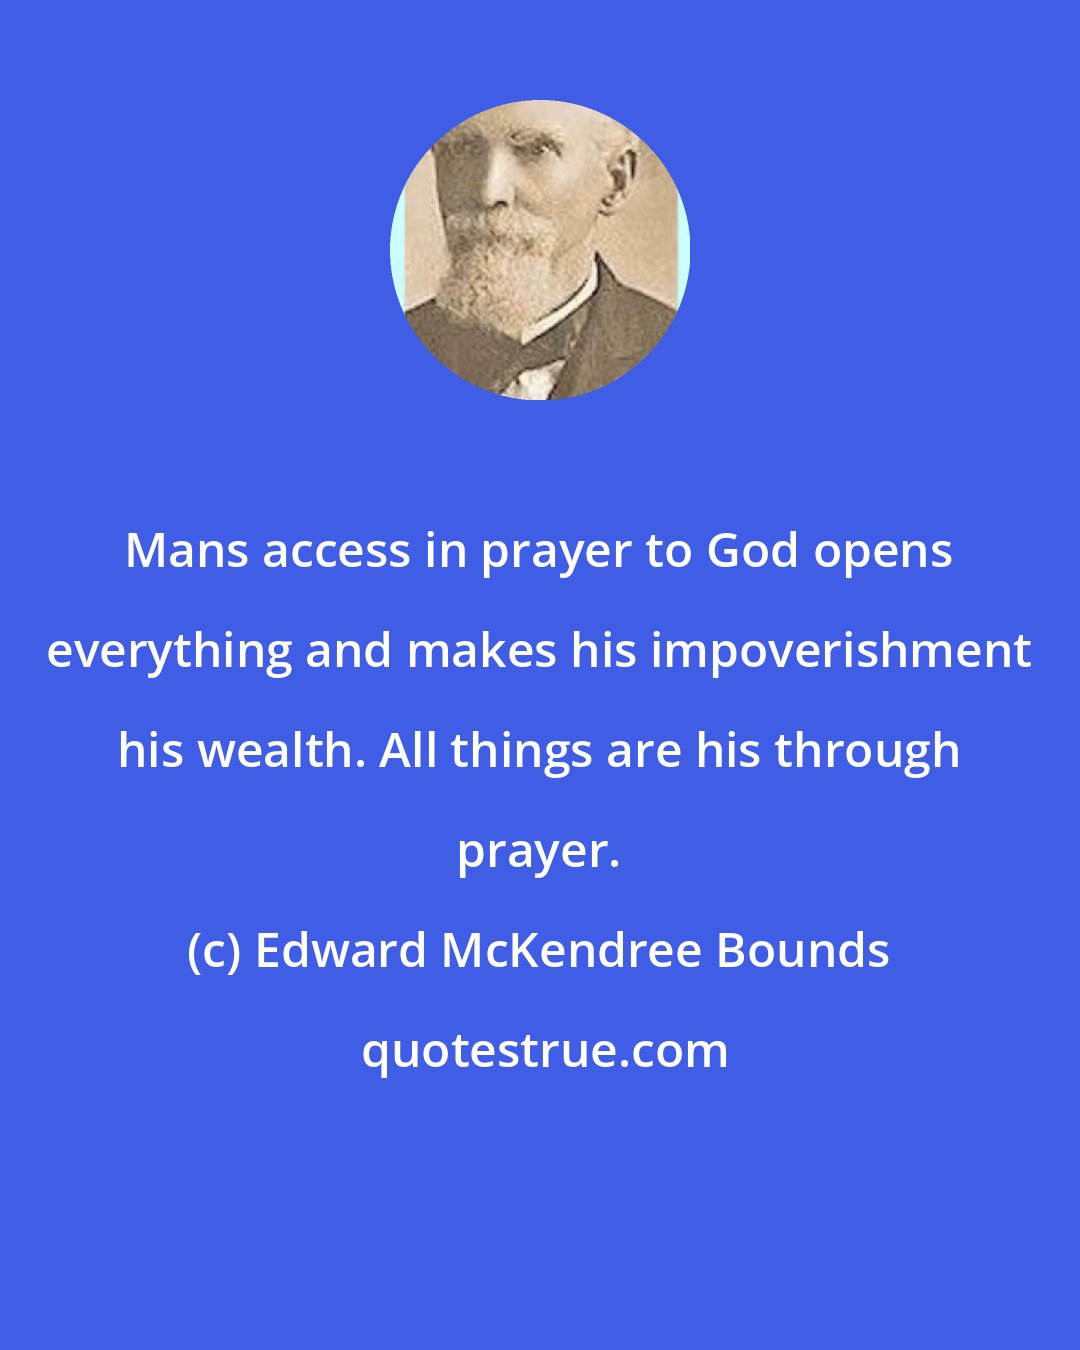 Edward McKendree Bounds: Mans access in prayer to God opens everything and makes his impoverishment his wealth. All things are his through prayer.